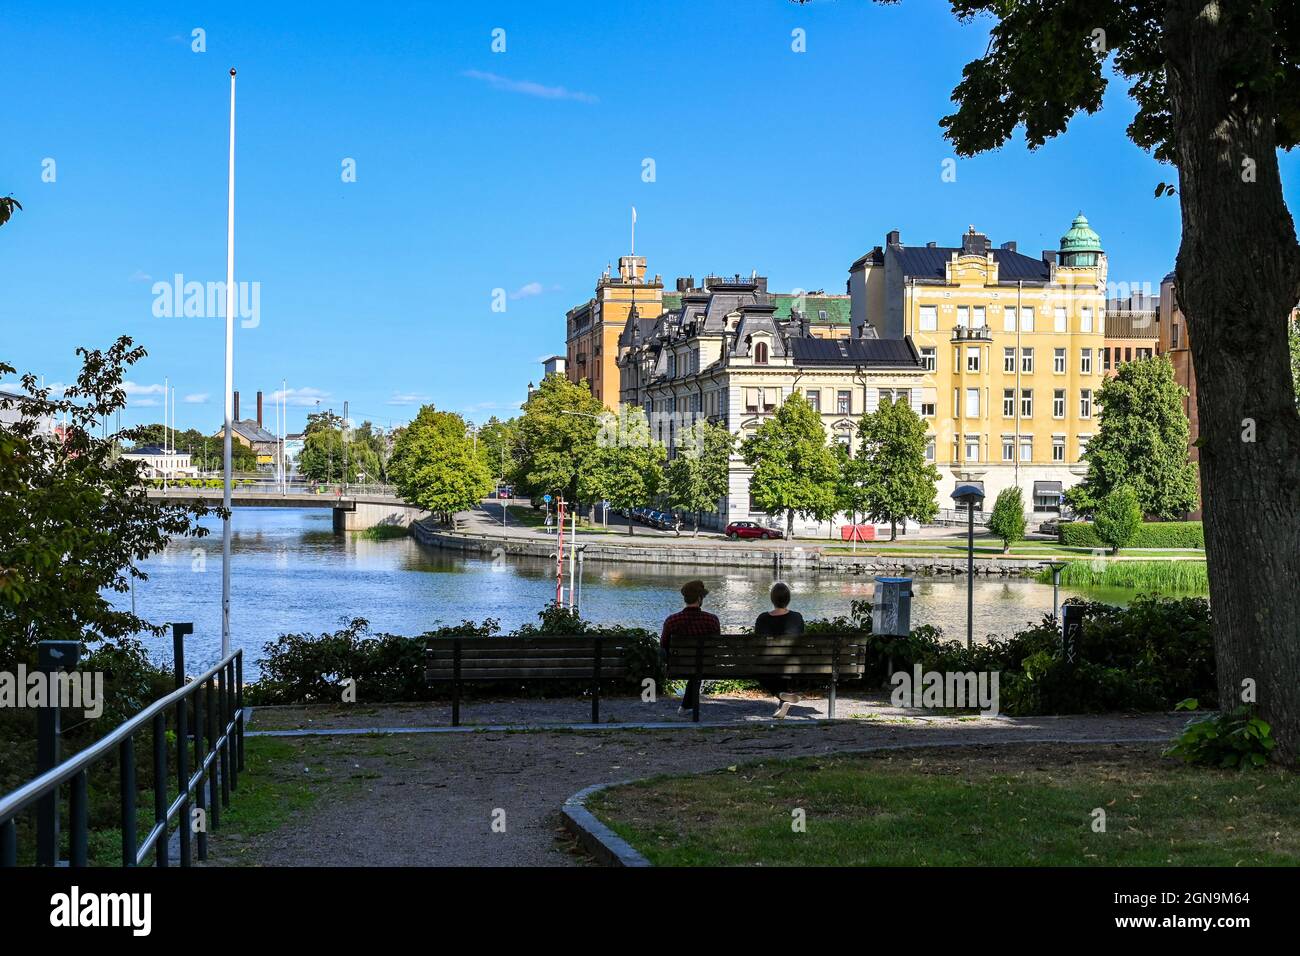 Two unrecognizable persons admire the view of Norrkoping city and Motala river at Refvens grund on a sunny day in August. Stock Photo